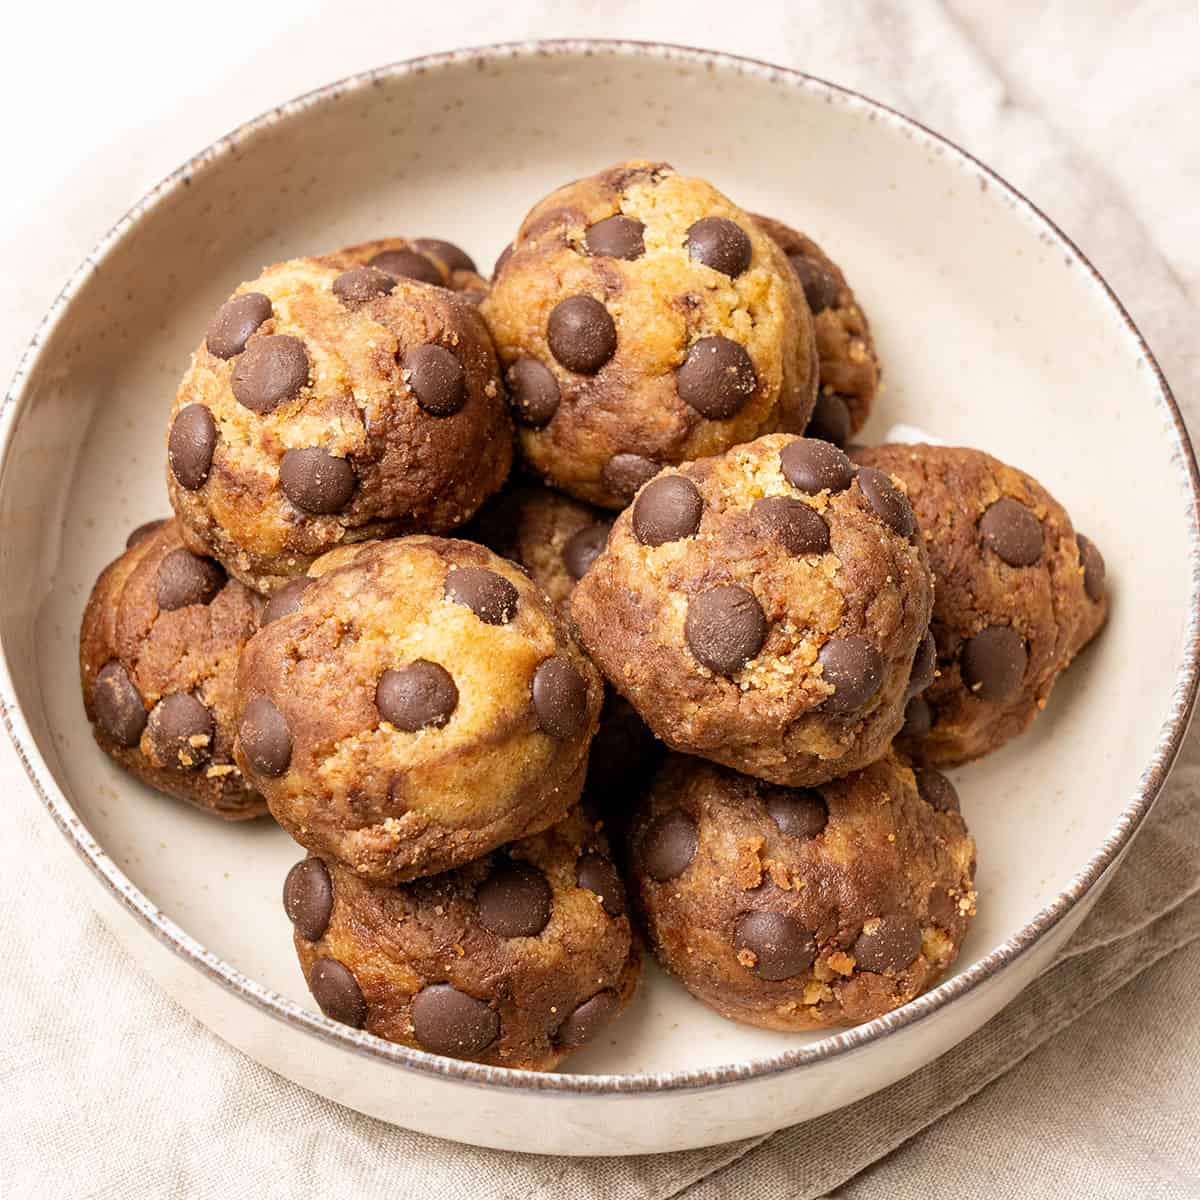 <p>Indulge in nostalgia with these <strong><a href="https://www.spatuladesserts.com/edible-cookie-dough-bites-no-bake/">edible cookie dough bites</a></strong> – the perfect no-bake, hassle-free treat to satisfy your sweet tooth! Crafted from just 7 simple ingredients, the dough is infused with aromatic vanilla and generously studded with mini chocolate chips, offering a delightful mix of buttery goodness and chocolatey crunch.</p><p><strong>Go to the recipe: <a href="https://www.spatuladesserts.com/edible-cookie-dough-bites-no-bake/">Edible Cookie Dough Bites</a></strong></p>